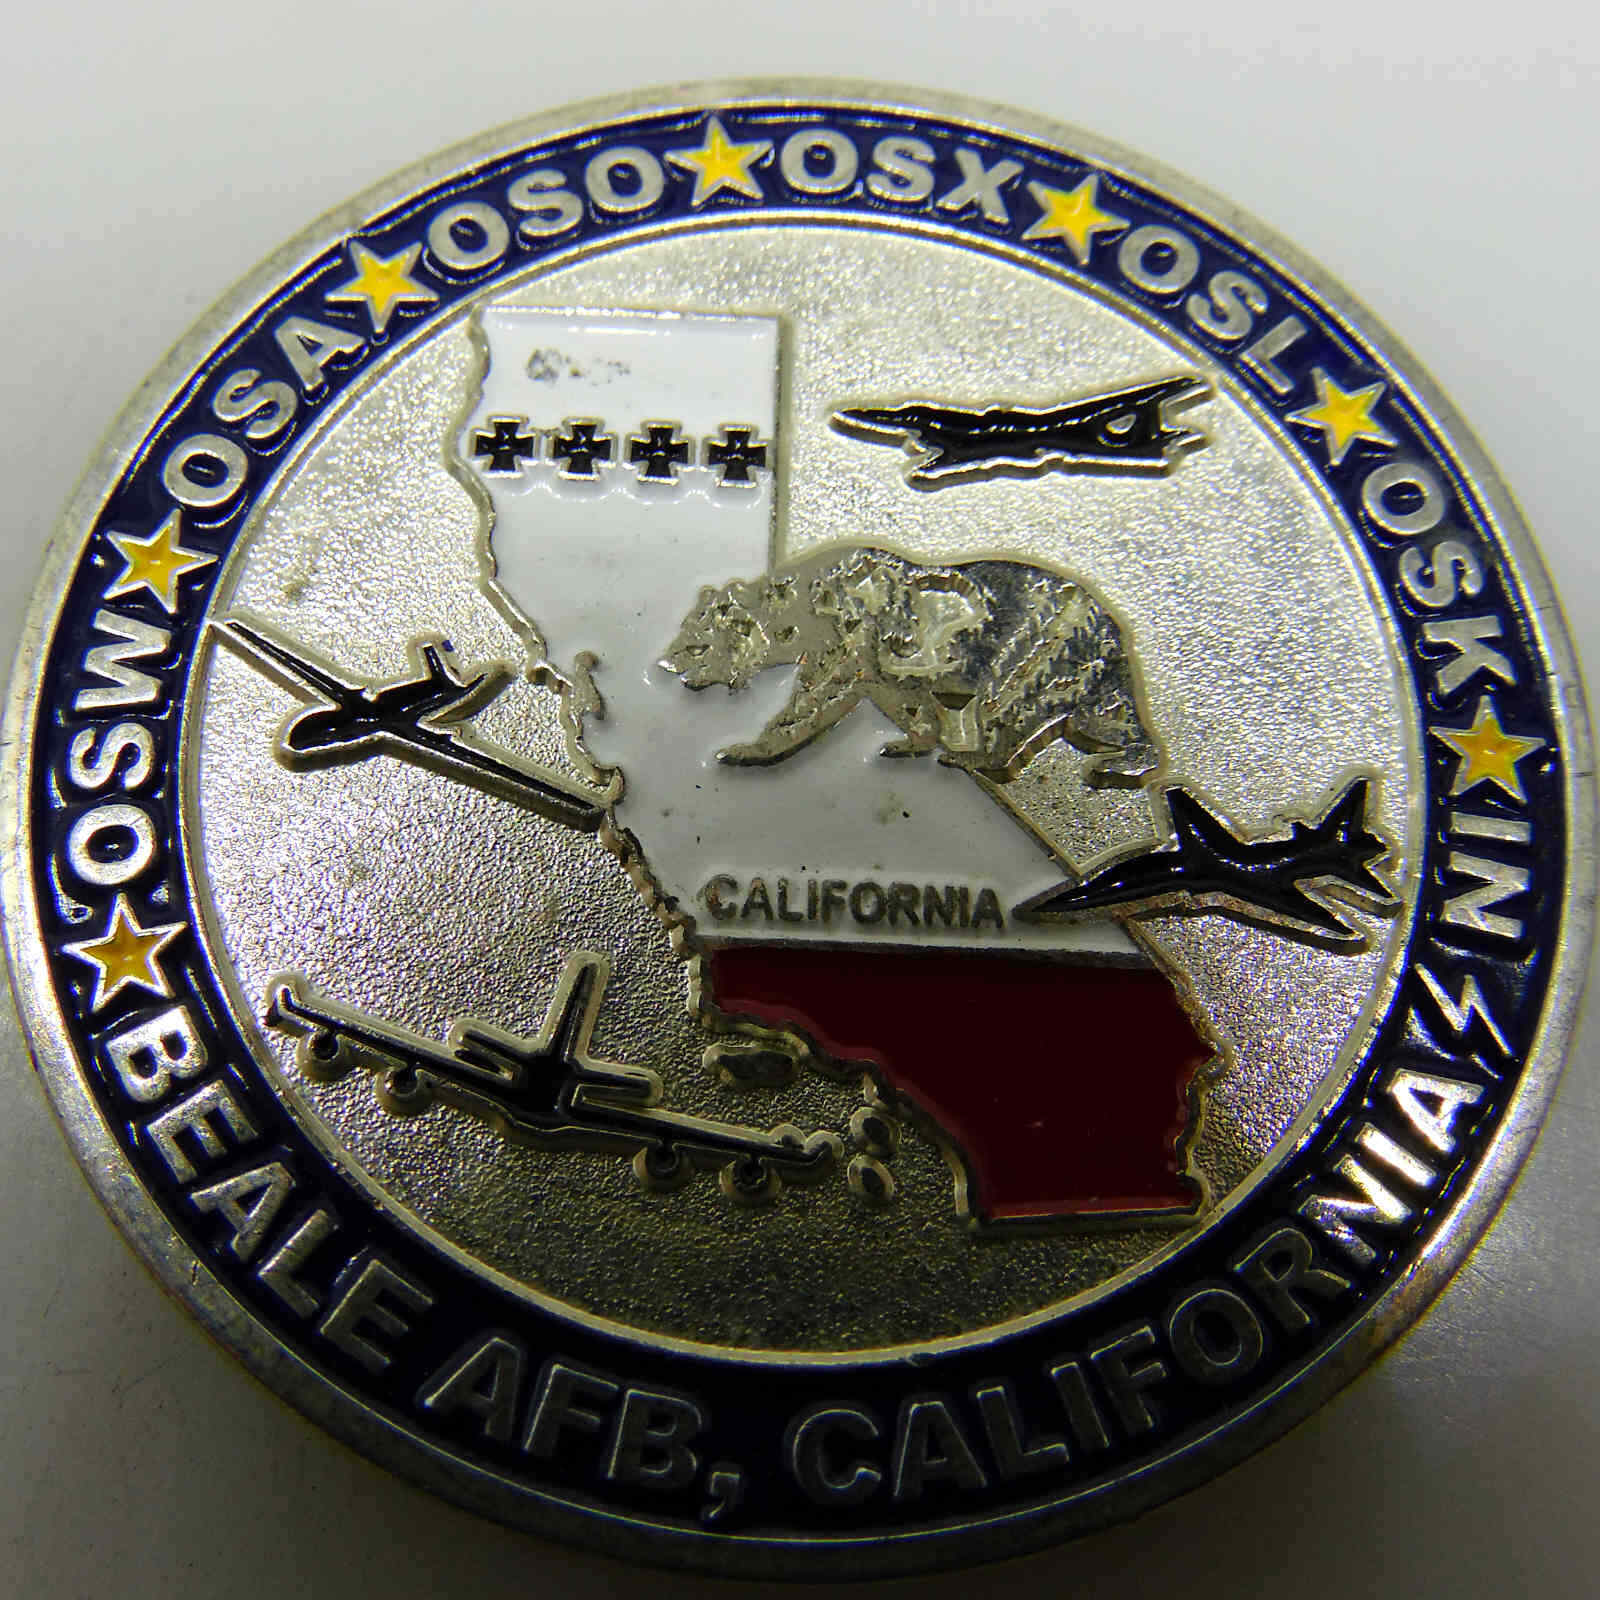 9TH OPERATIONS SUPPORT SQ BEALE AFB CALIFORNIA CHALLENGE COIN